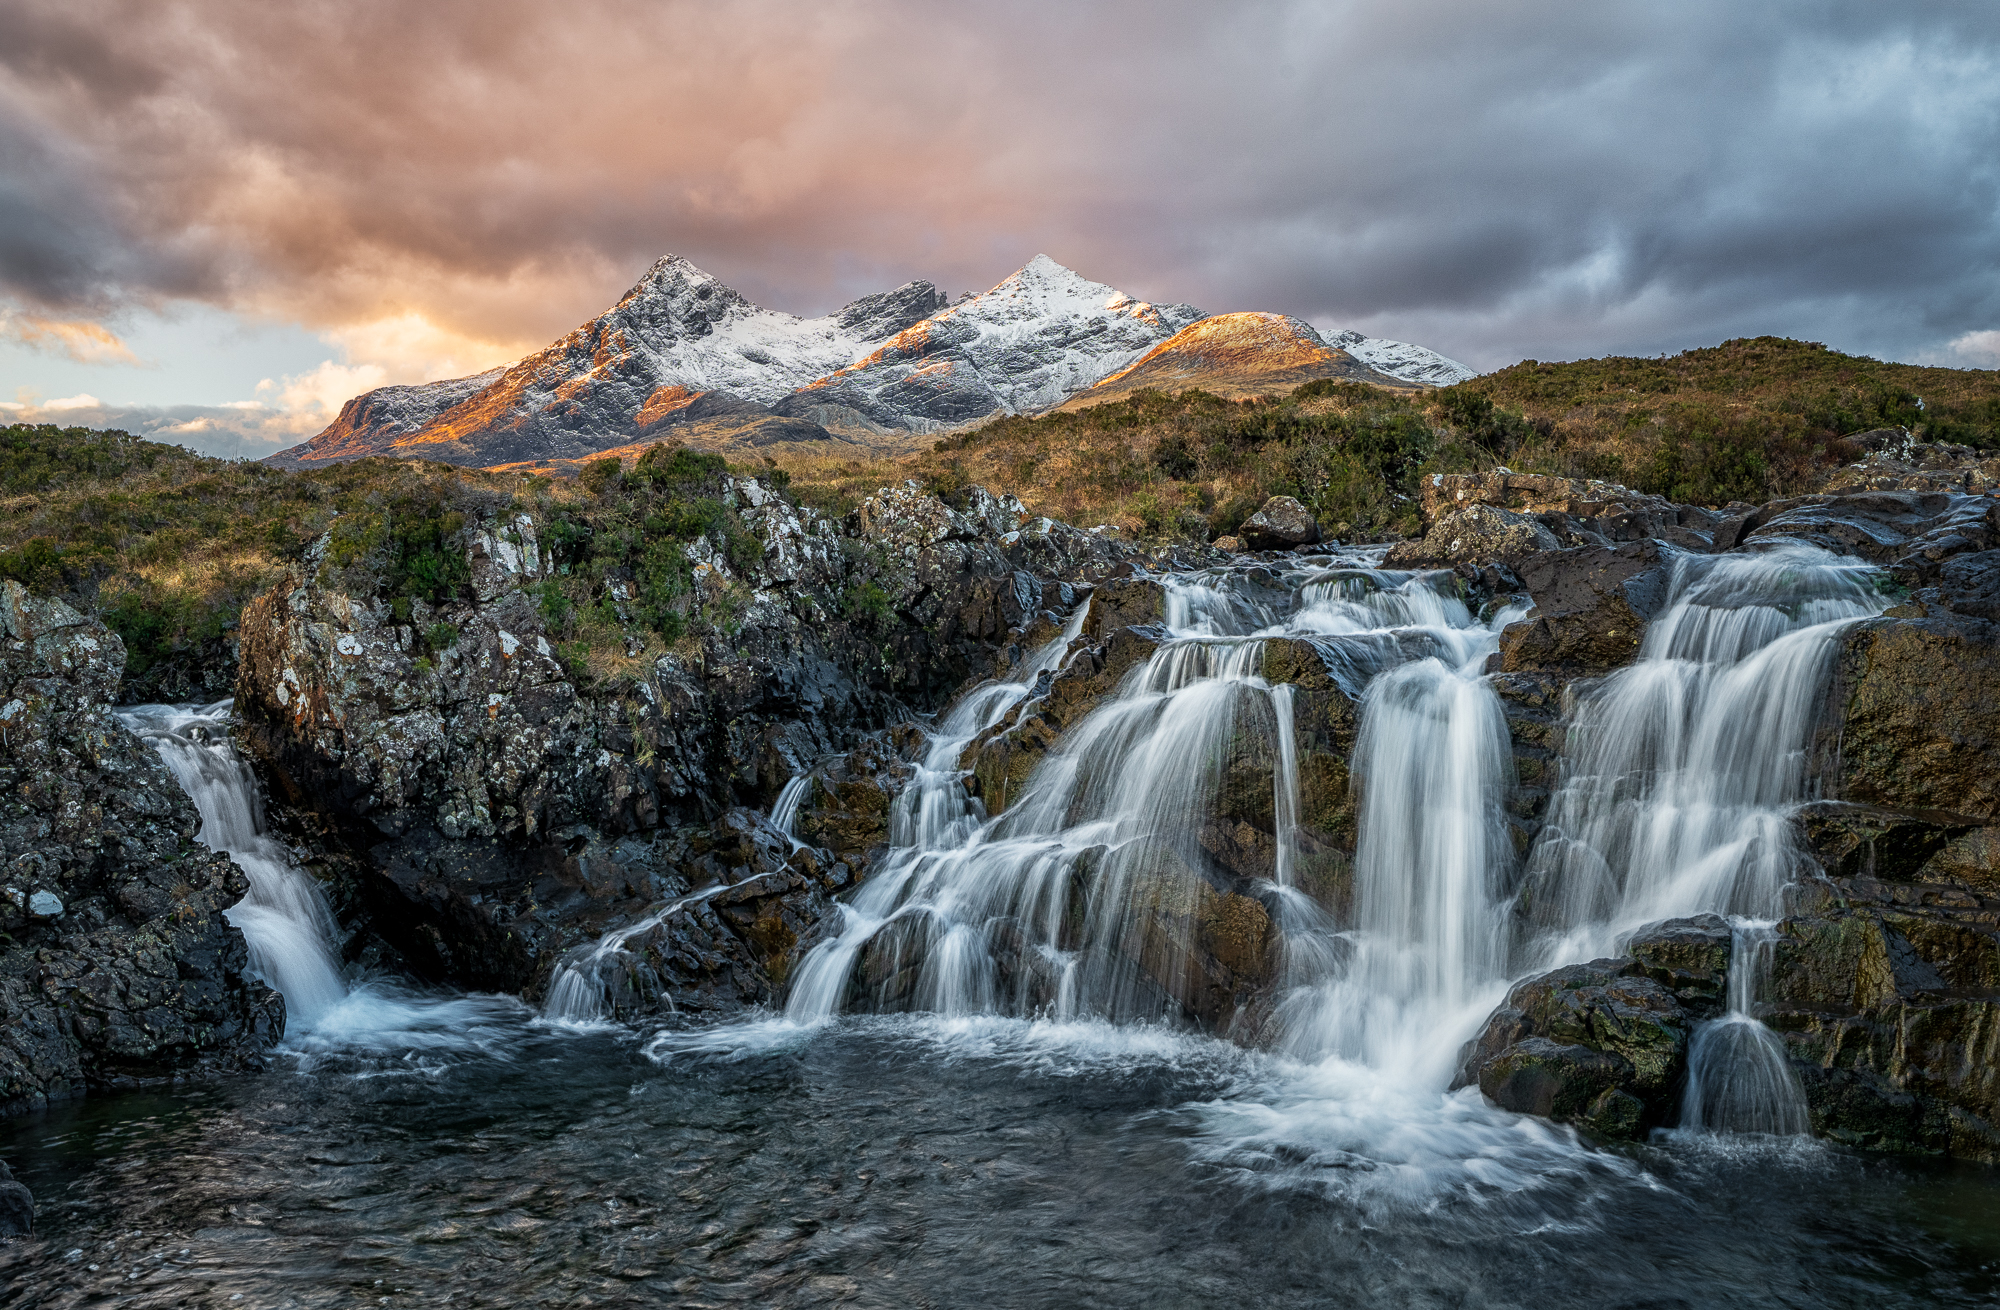 2nd Place, Skye Gold By Mark Hetherington LRPS